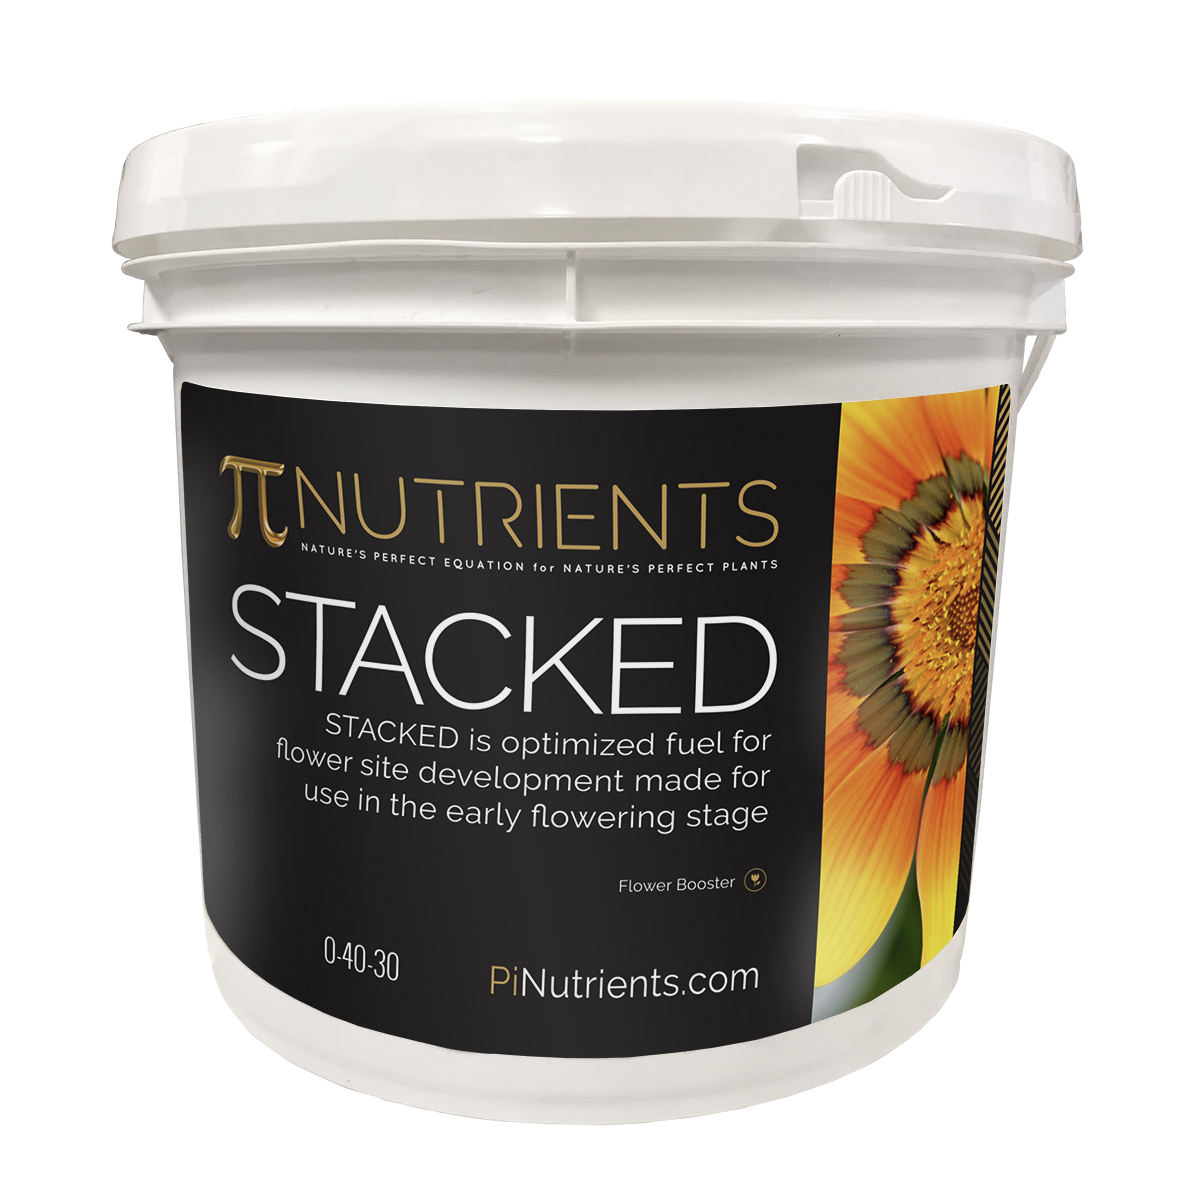 Pi Nutrients STACKED